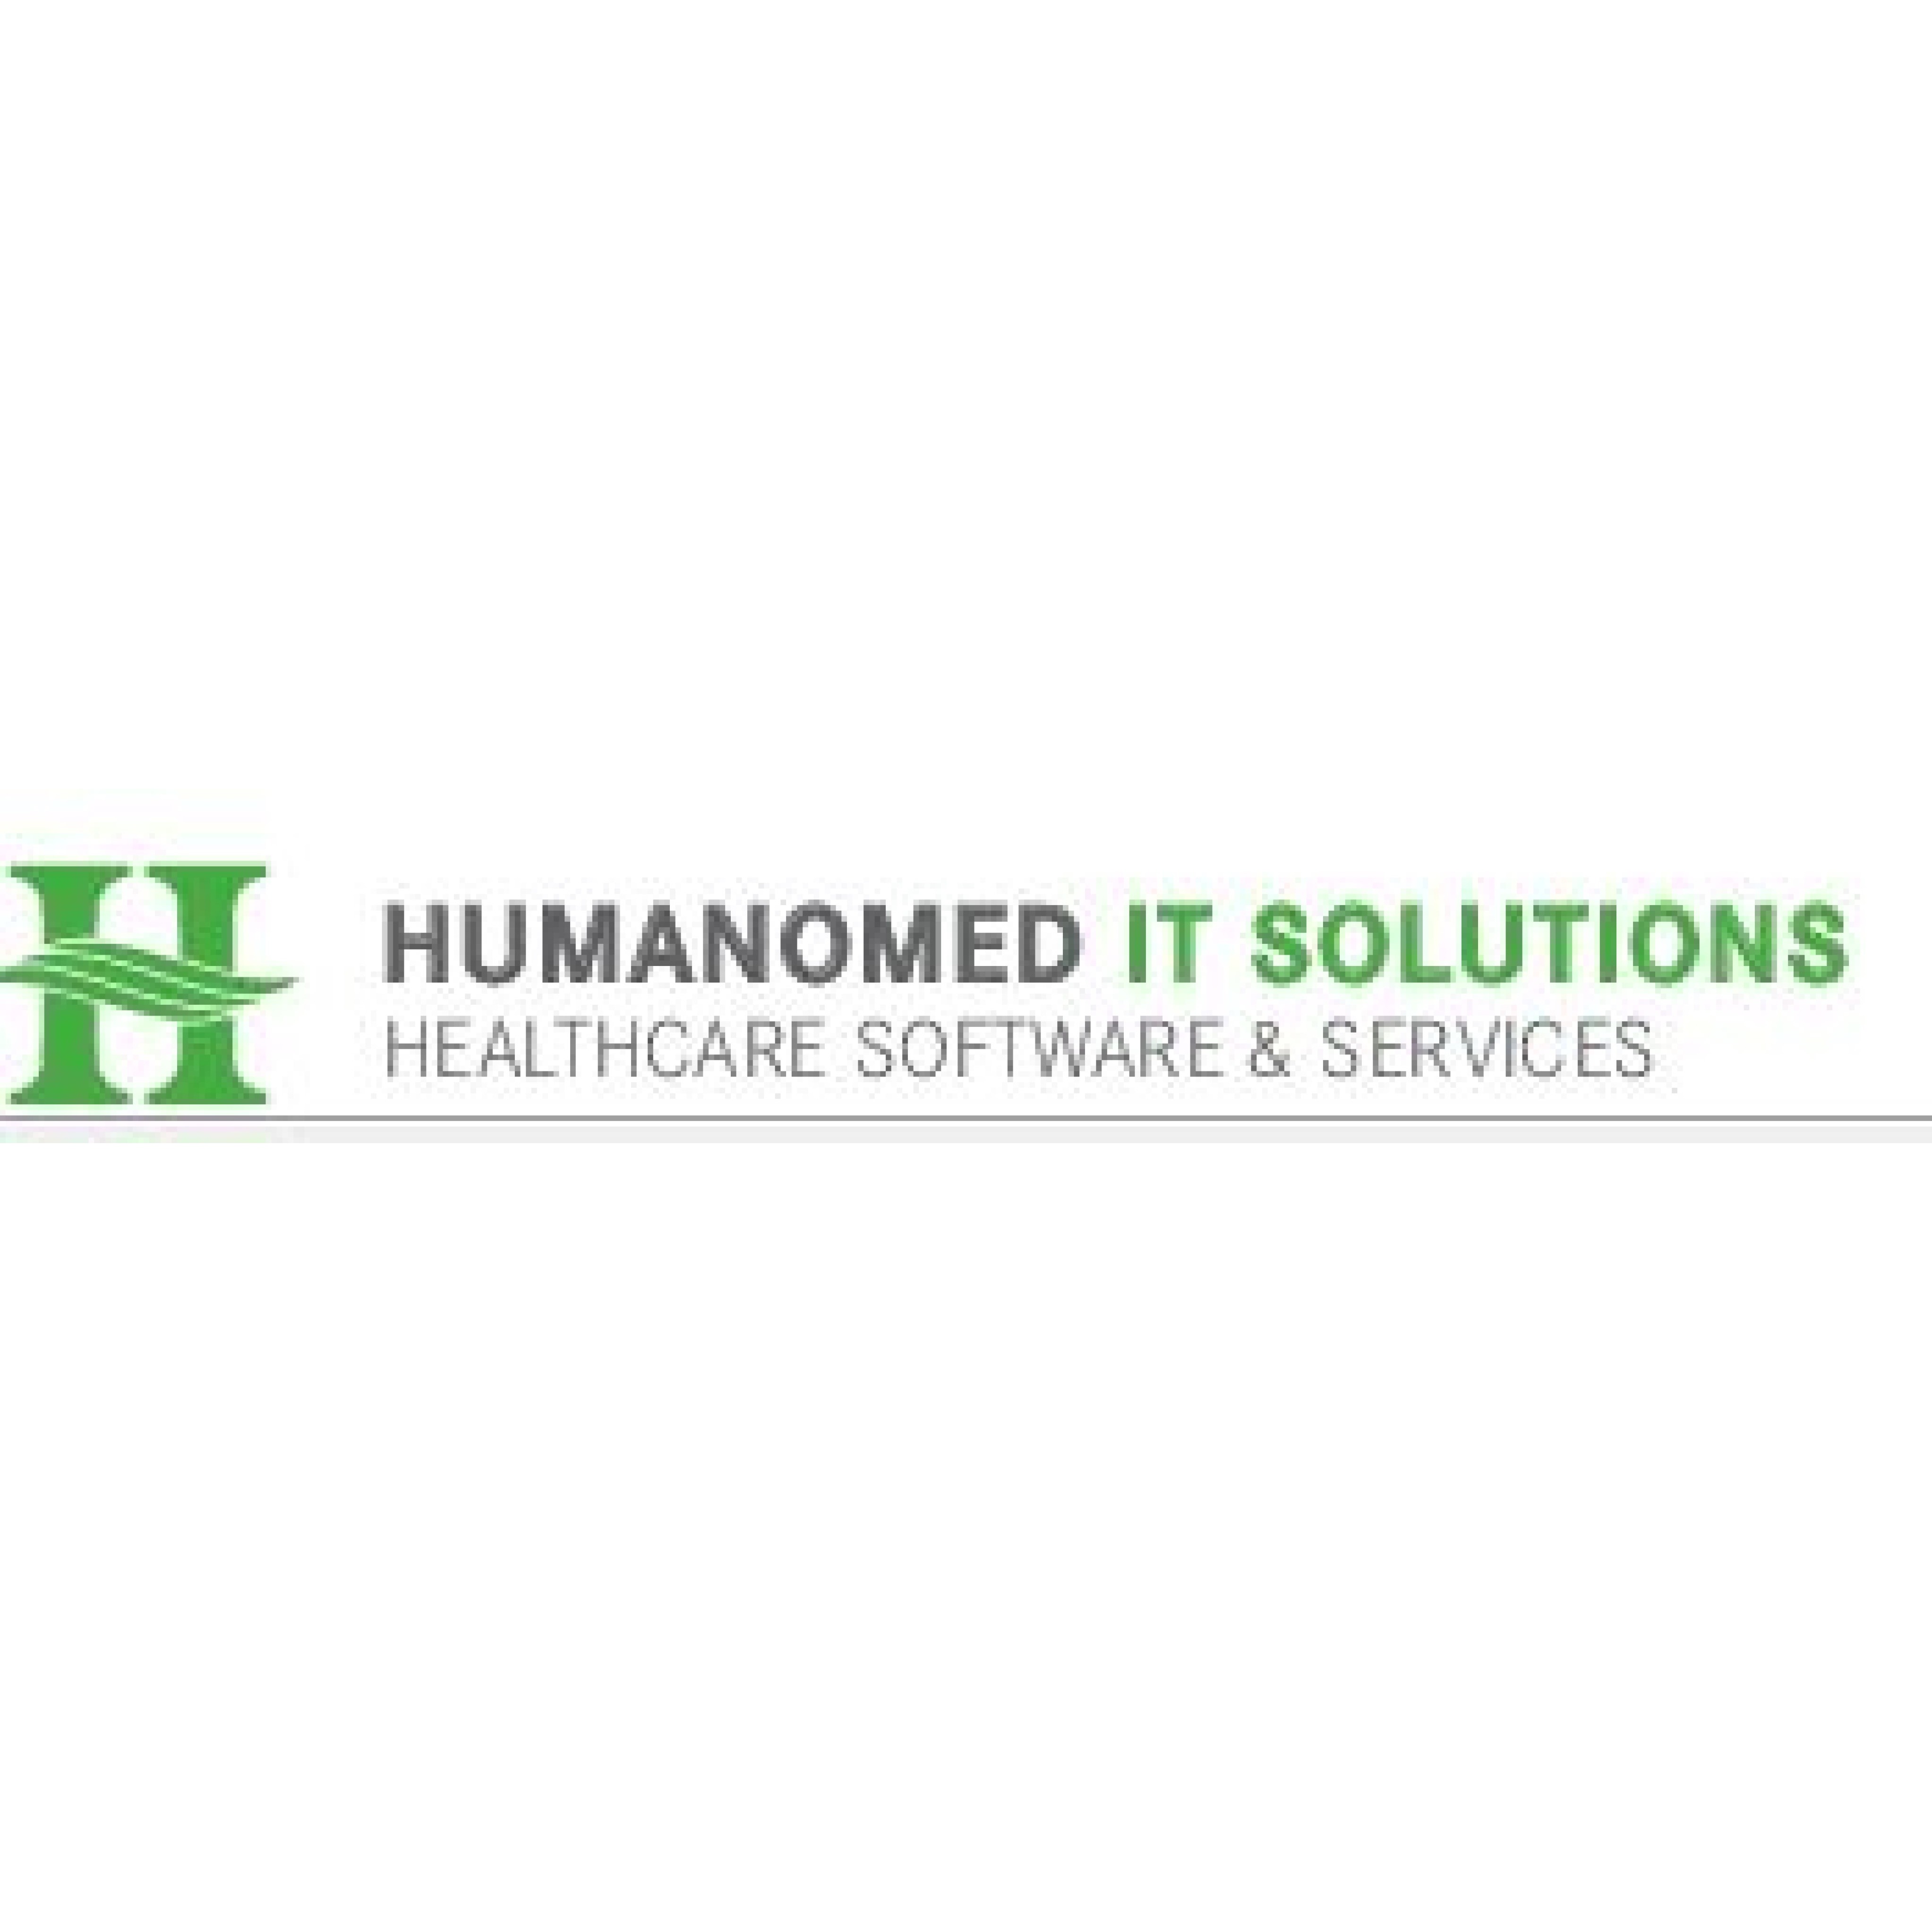 HUMANOMED IT SOLUTIONS GMBH